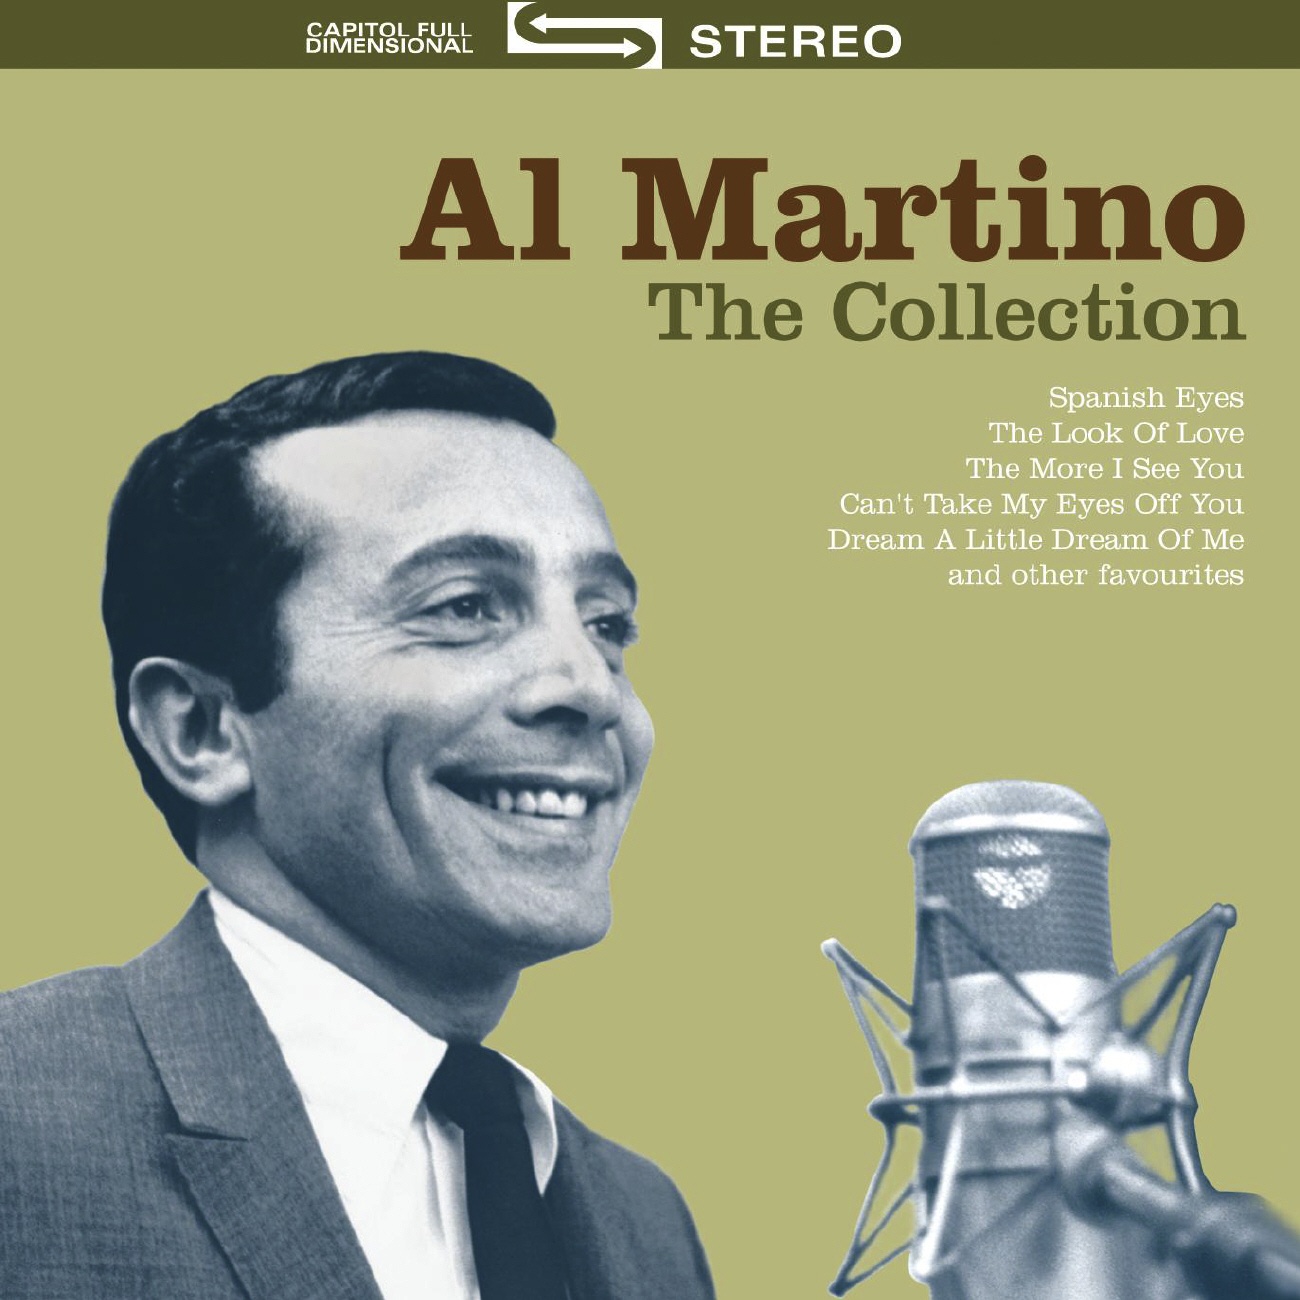 The Very Best Of Al Martino